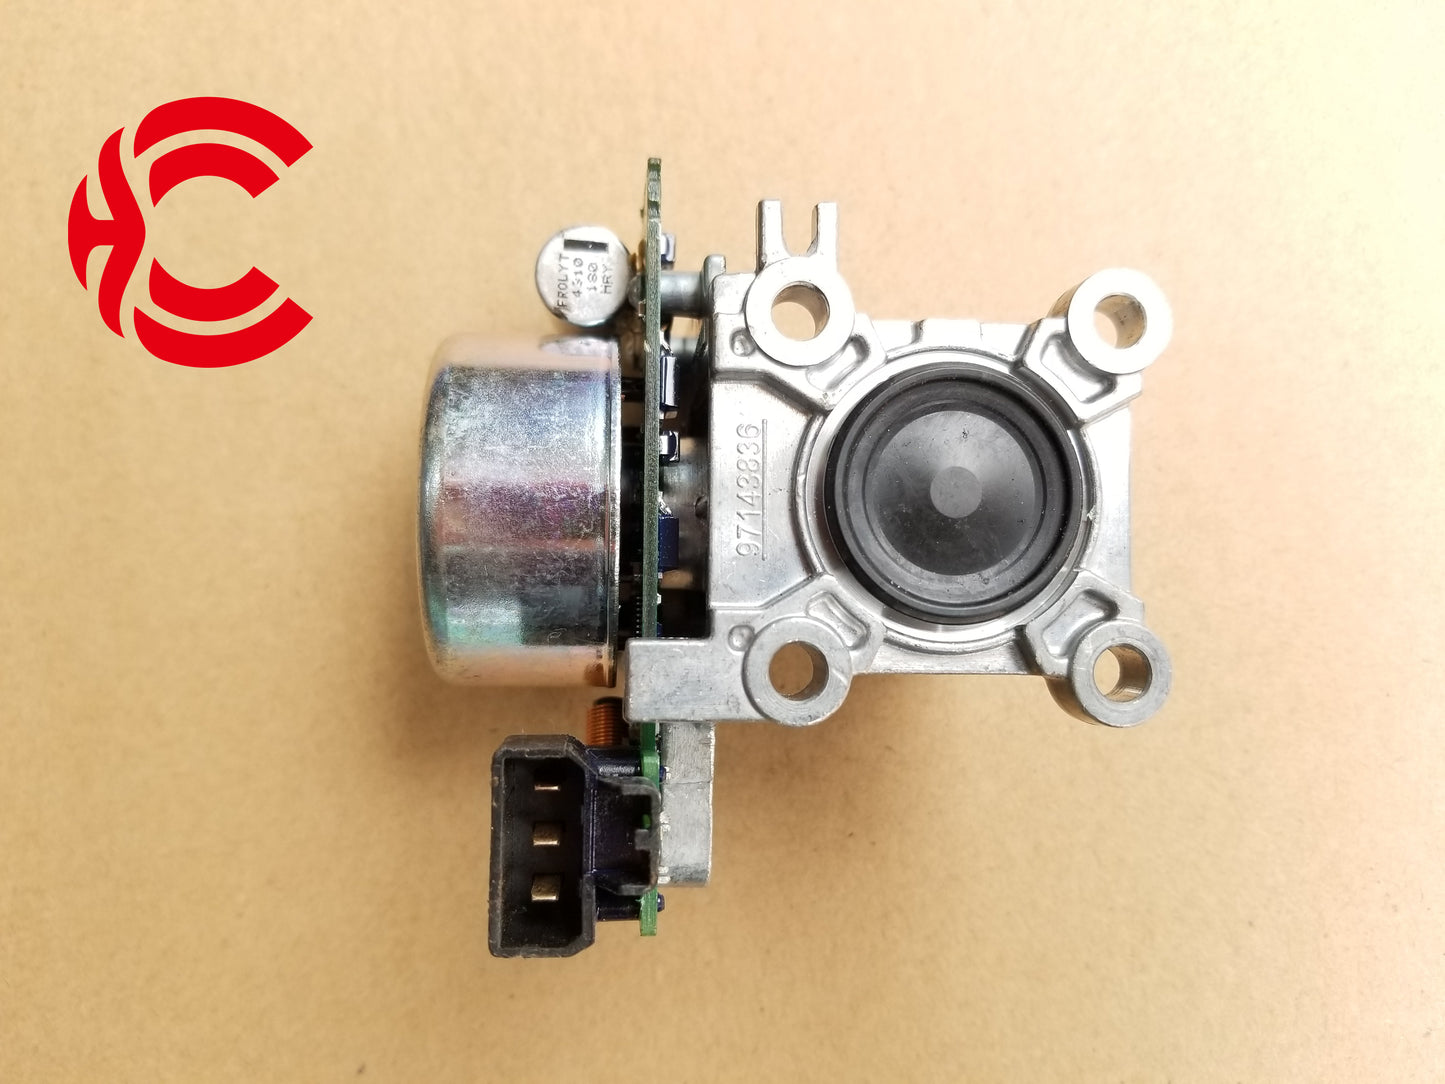 OEM: BOSCH6.5 Adblue Pump MotorMaterial: ABS metalColor: black silverOrigin: Made in ChinaWeight: 500gPacking List: 1* Adblue Pump Motor More ServiceWe can provide OEM Manufacturing serviceWe can Be your one-step solution for Auto PartsWe can provide technical scheme for you Feel Free to Contact Us, We will get back to you as soon as possible.